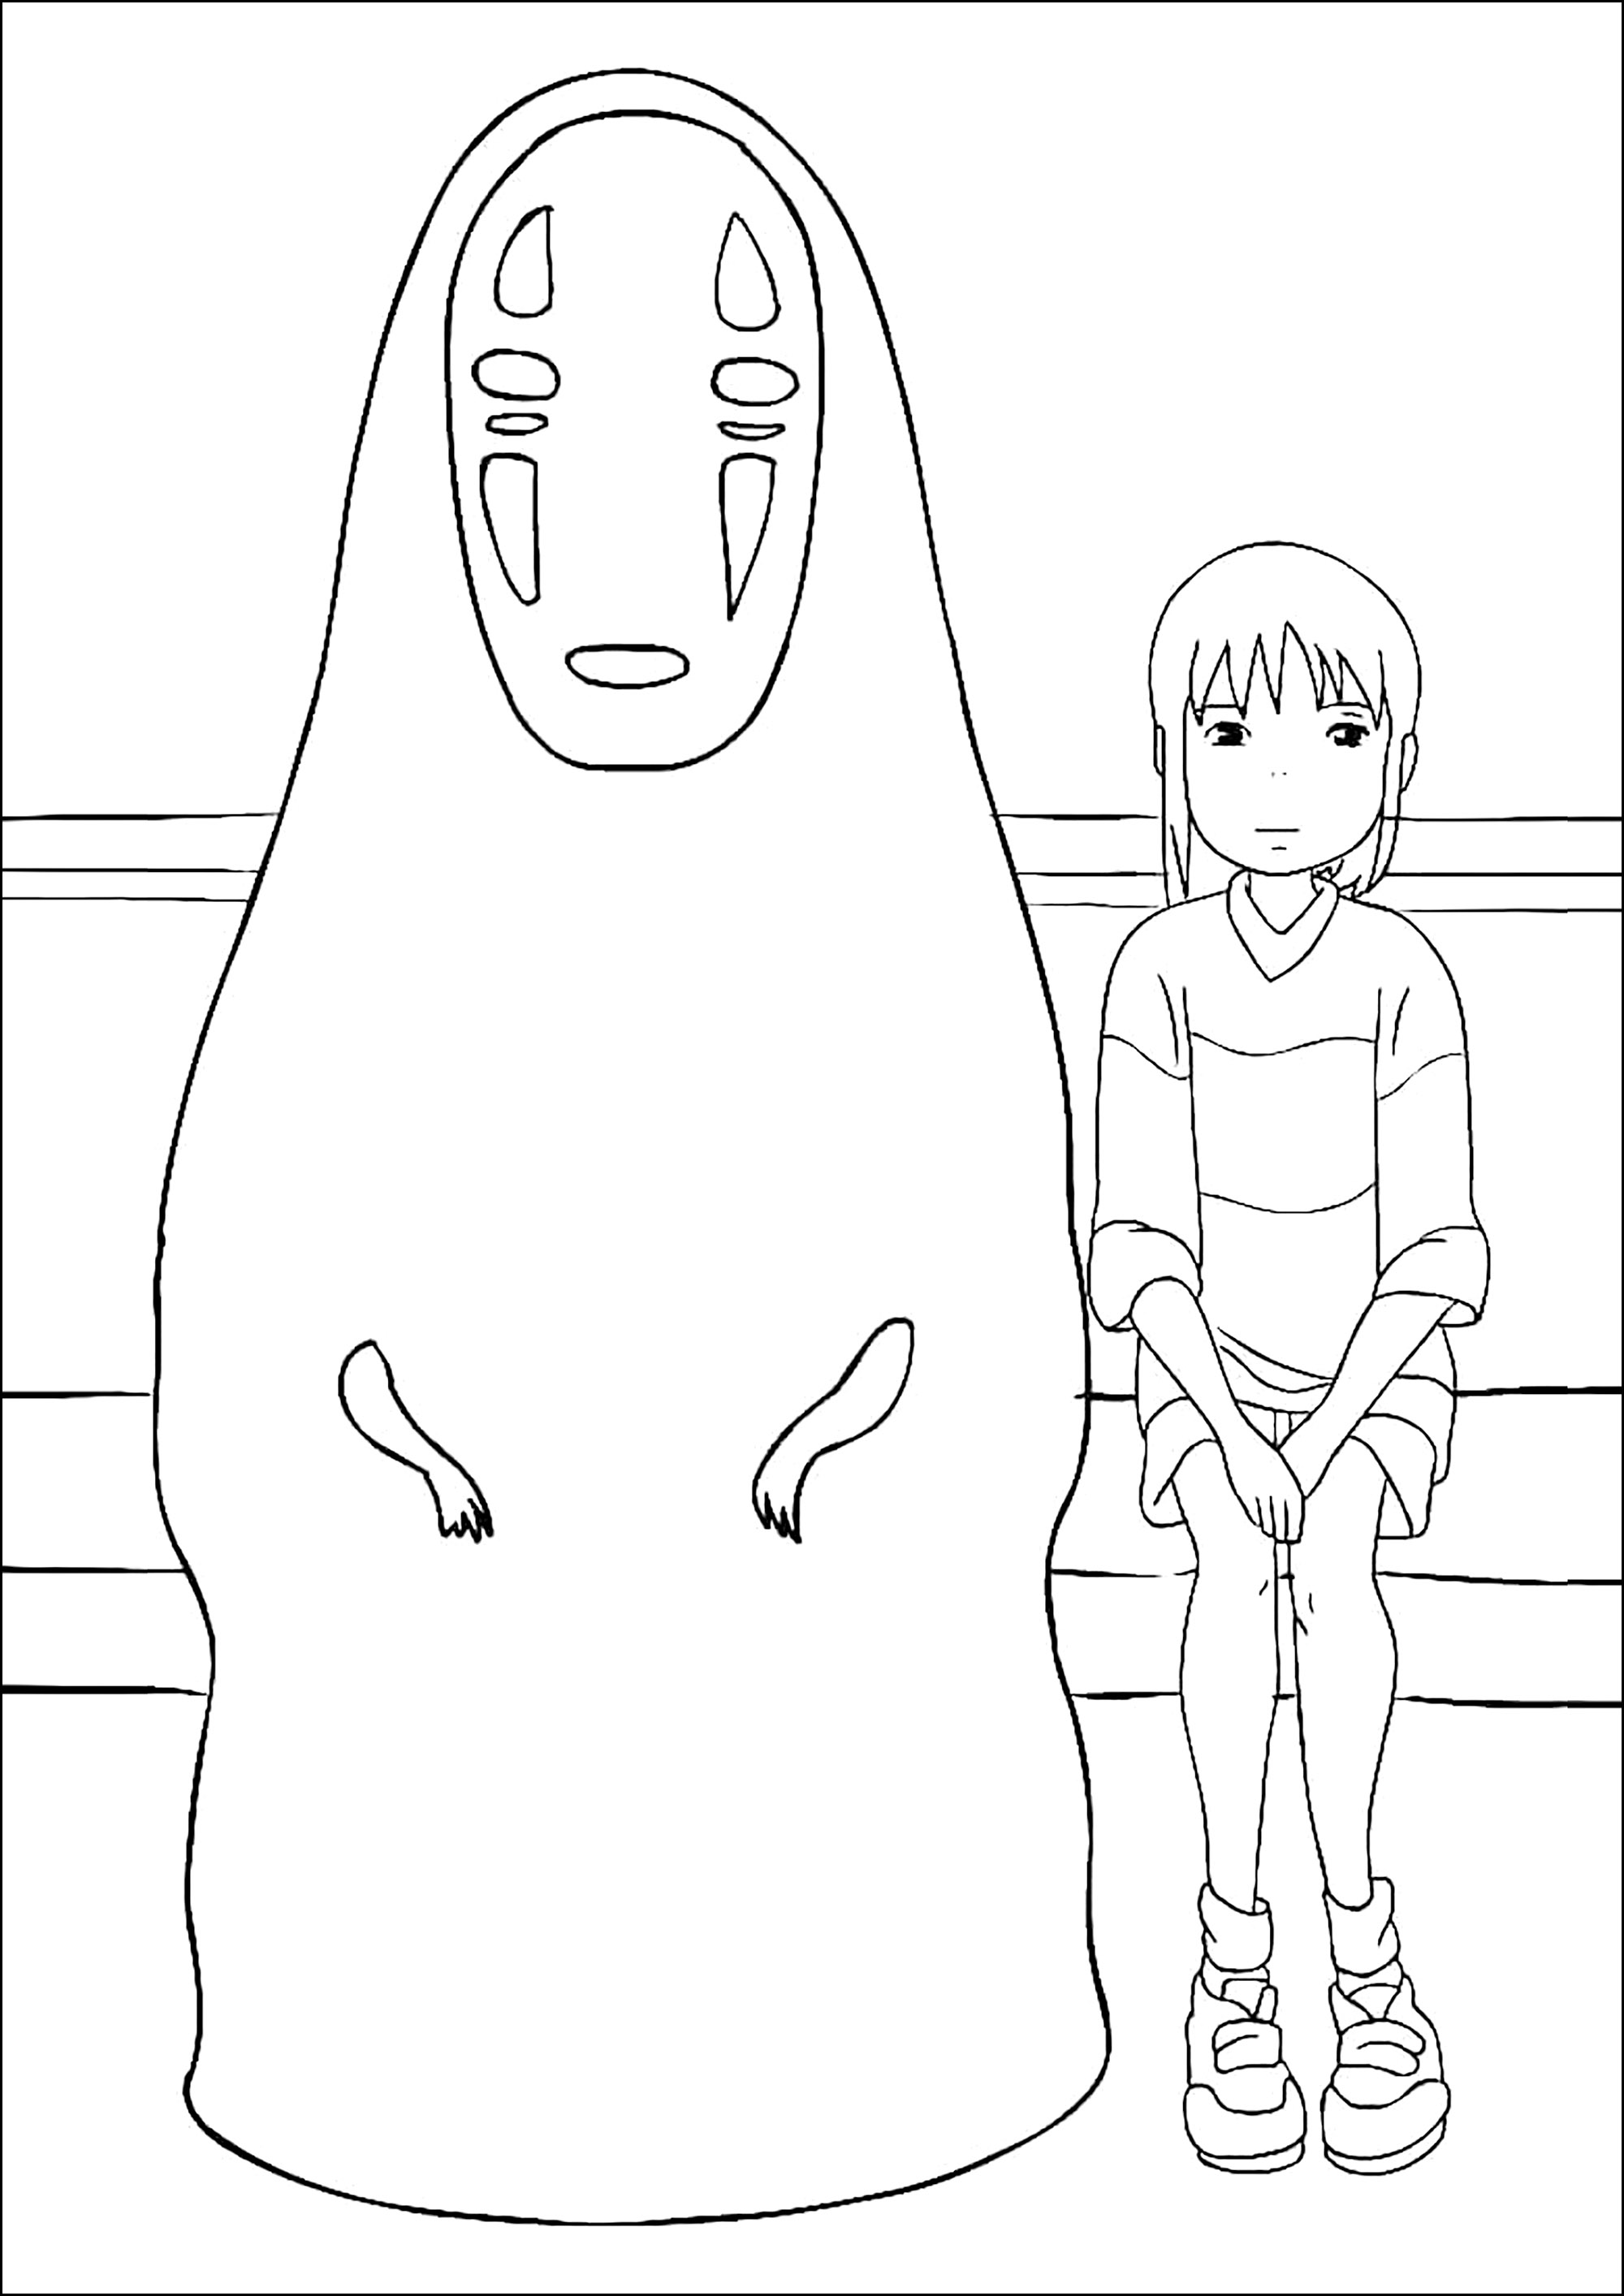 Spirited Away : Chihiro and Kaonashi ('Faceless'). Kaonashi. The 'faceless' is an enigmatic character who can make himself invisible, his face hidden by a mask.